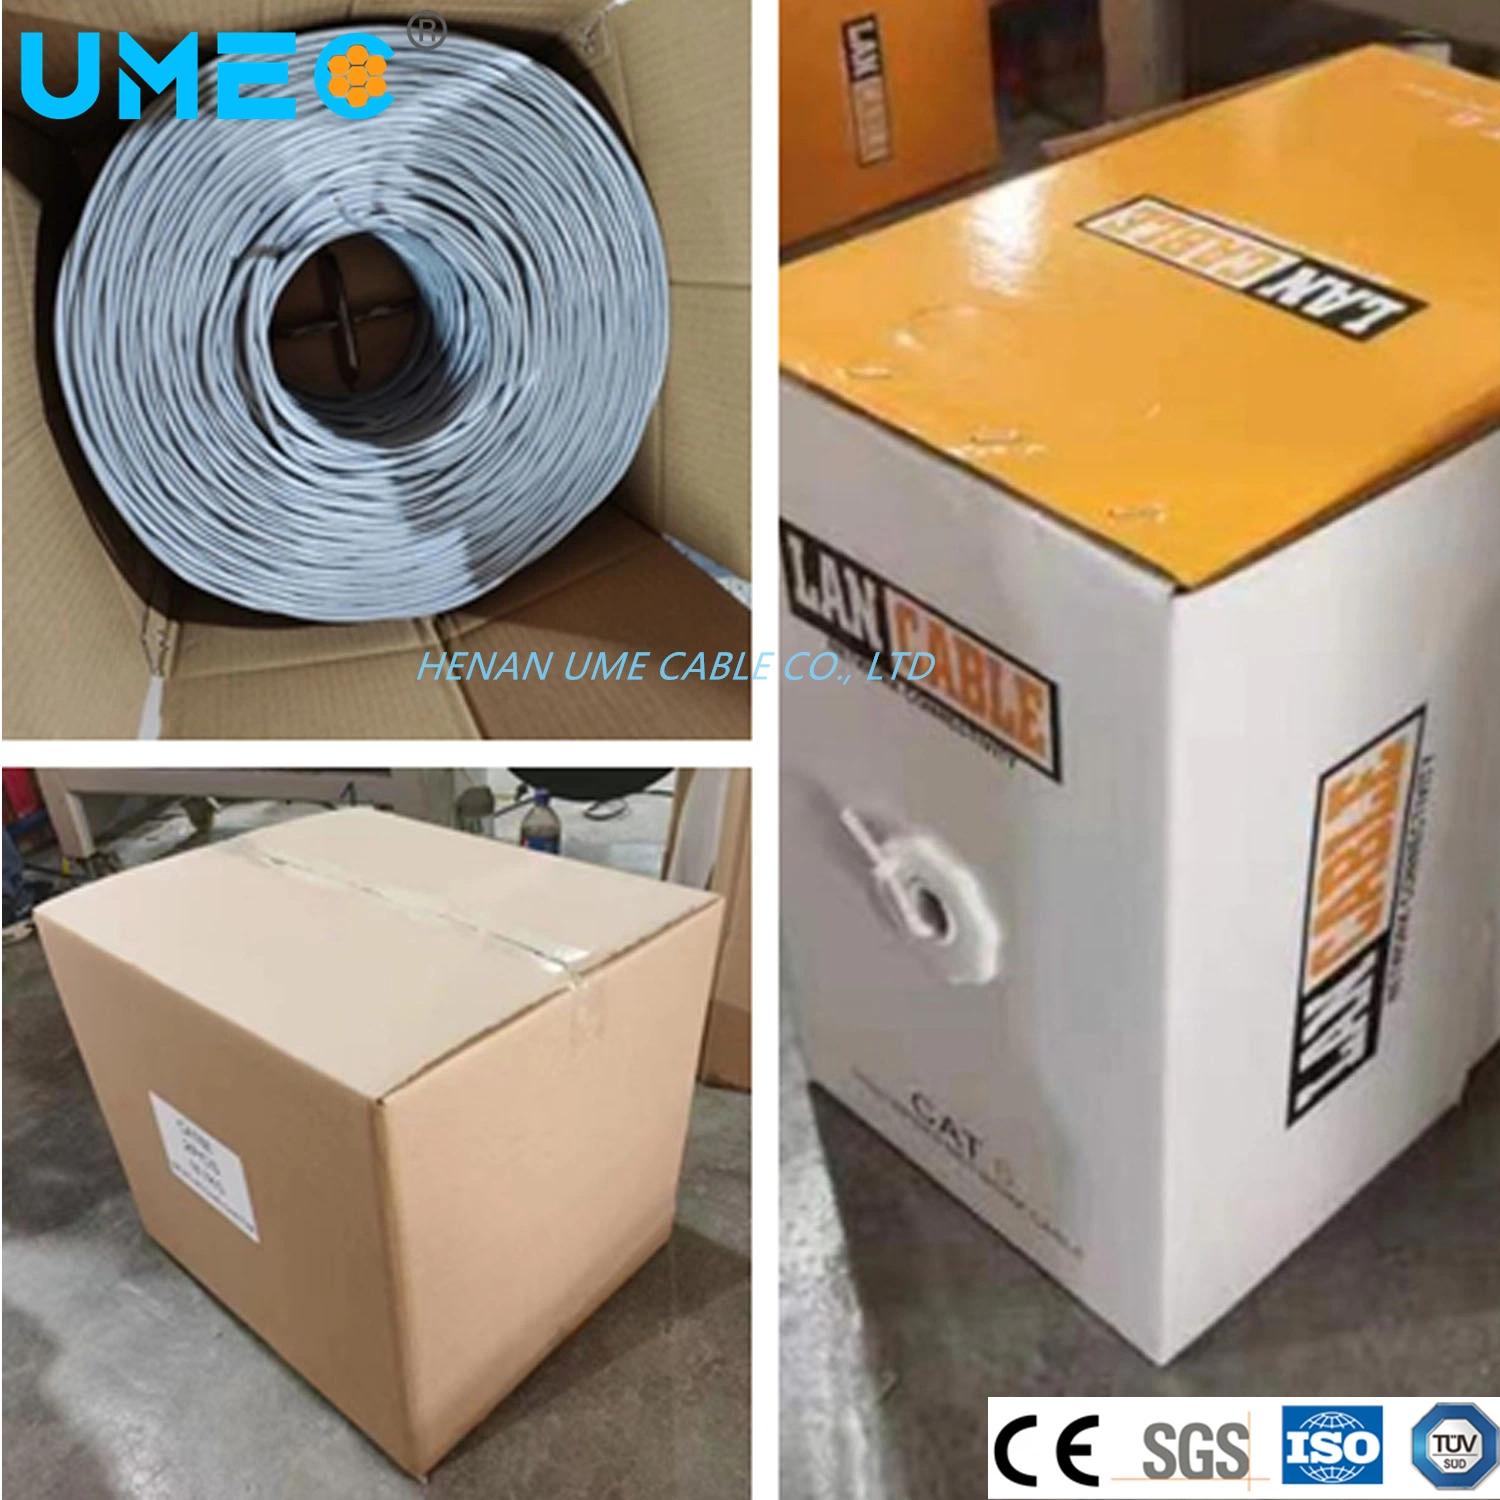 Good/High quality/High cost performance  Data LAN Ethernet Network Cable Network Cable CAT6 UTP Wall Socket Cable